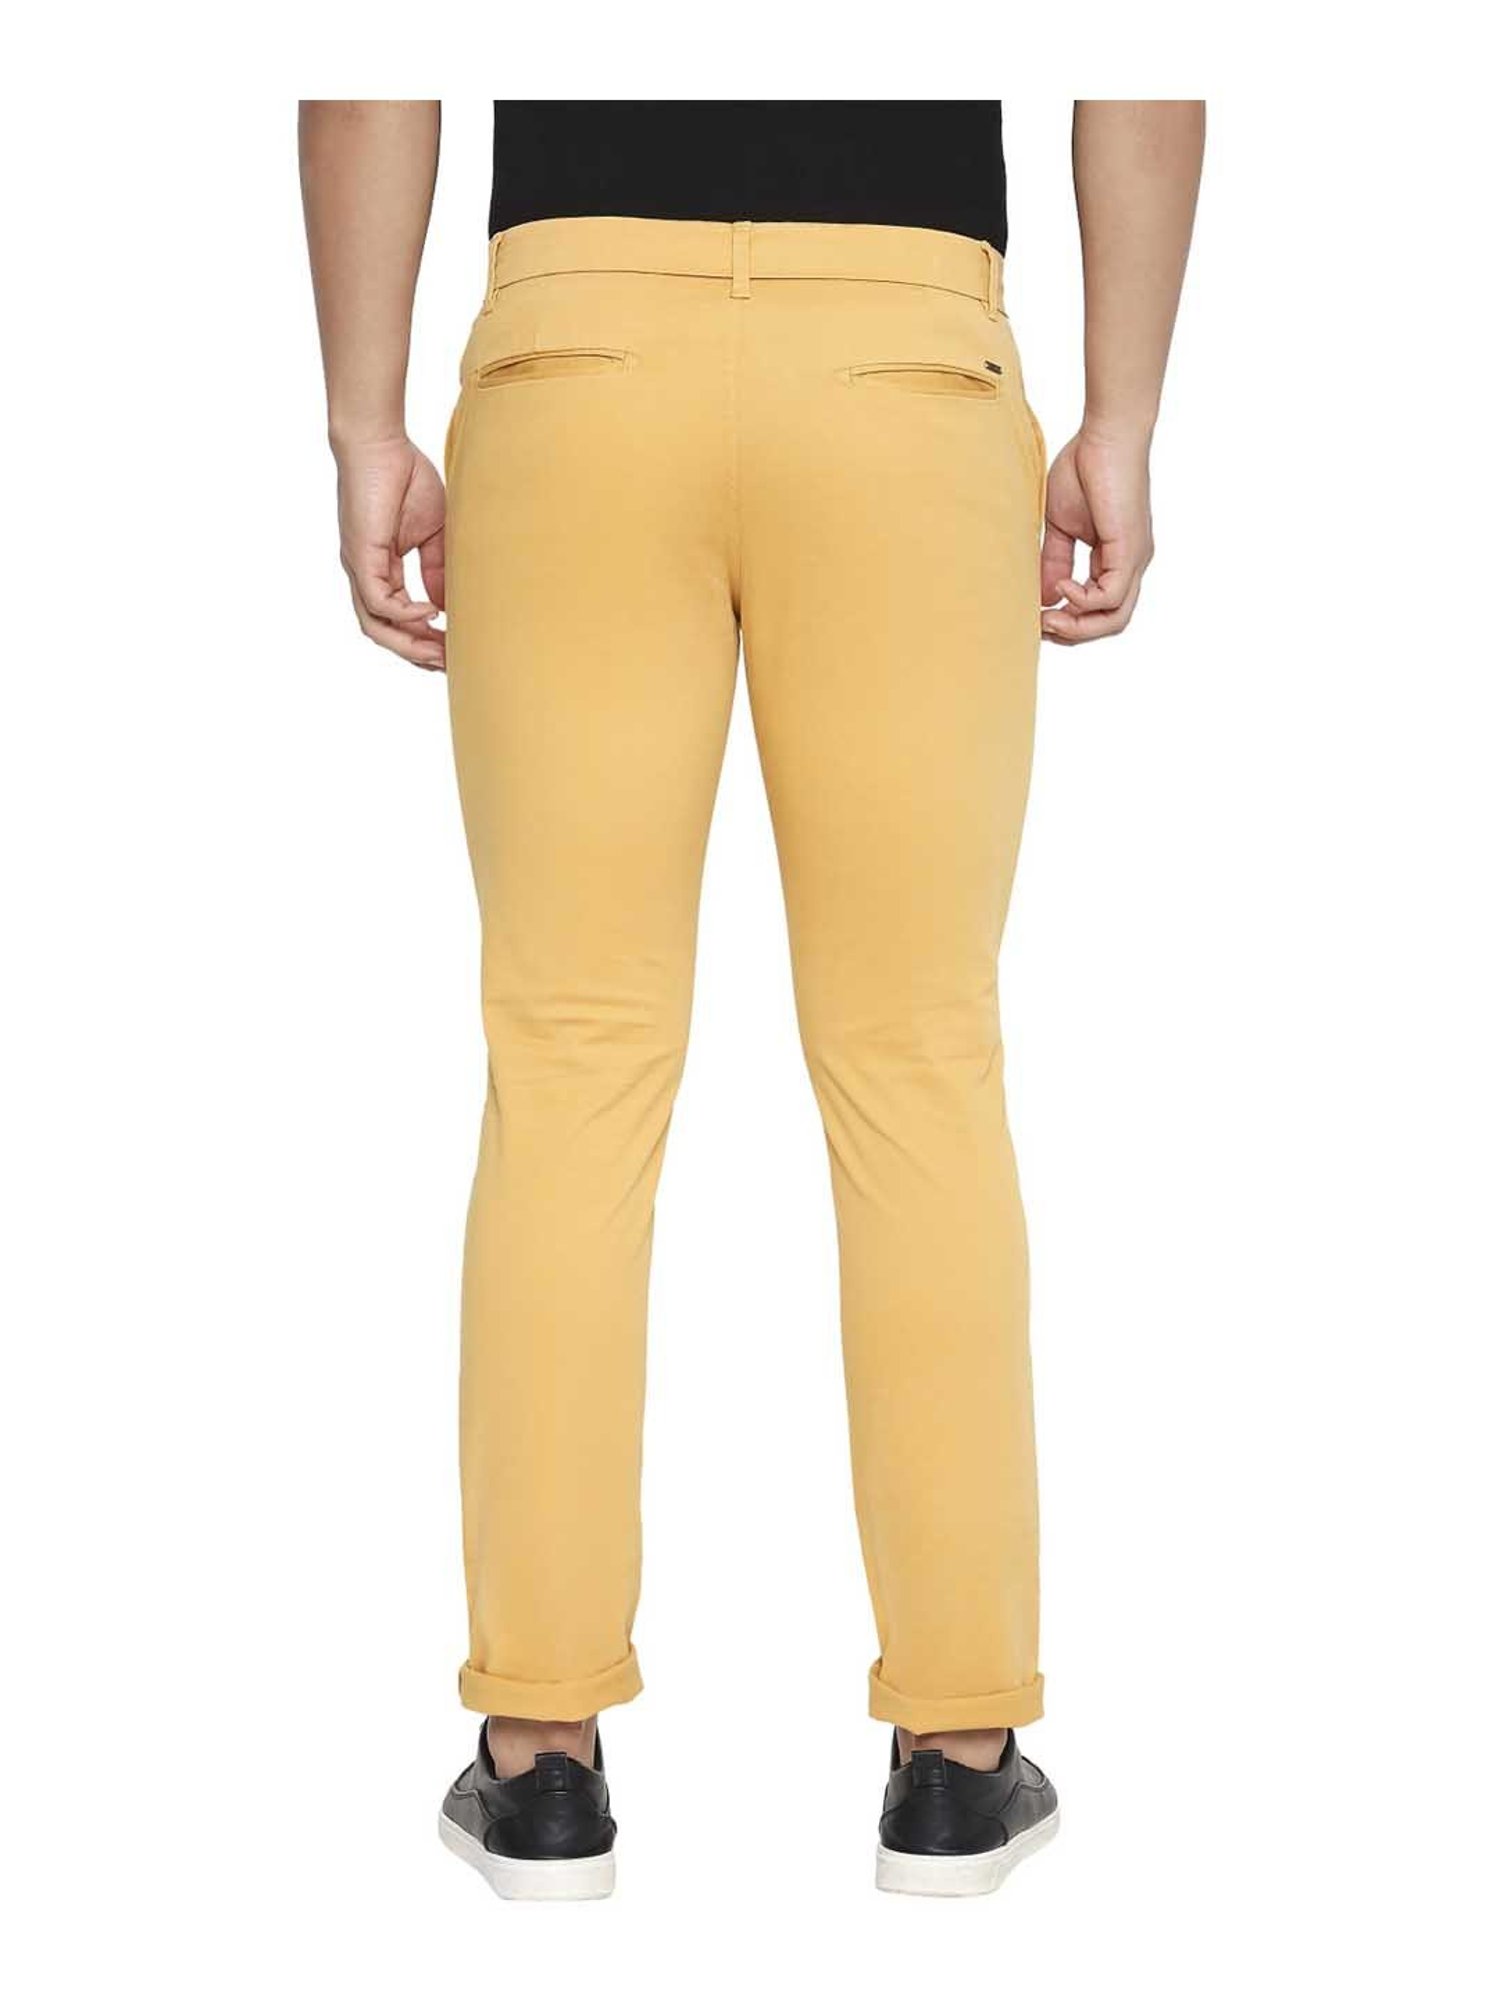 BASICS Casual Trousers  Buy BASICS Casual Self Beige Cotton Stretch  Tapered Trouser Online  Nykaa Fashion